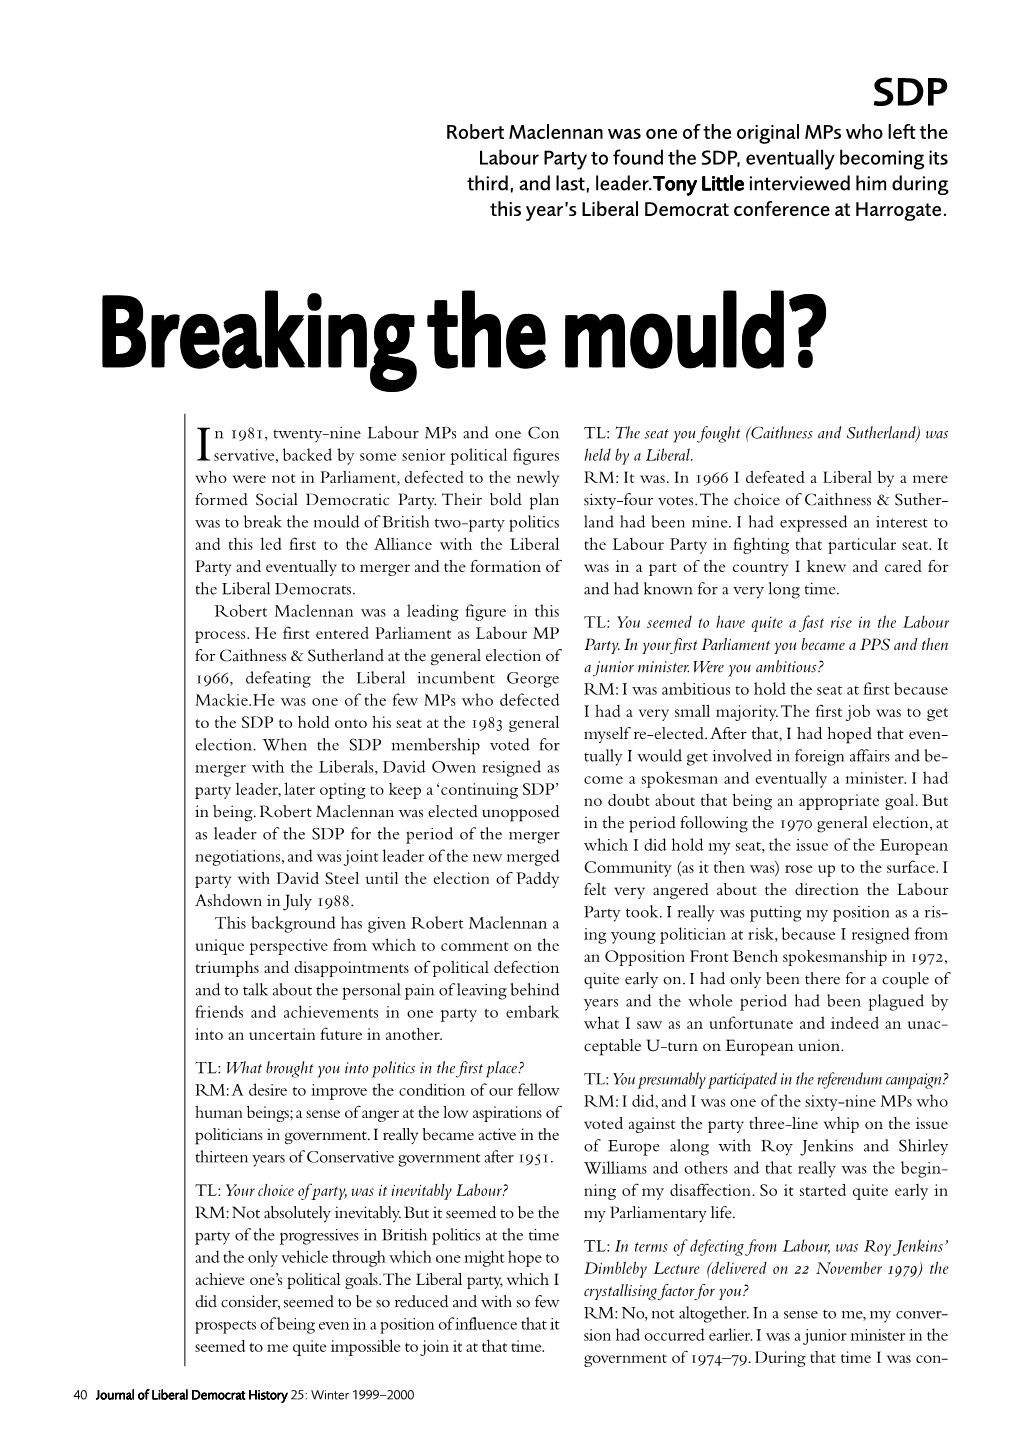 Breaking the Mould? the New Liberal Democrats Had Origi- Ceptance of the Role of Our Party in Lo- Continued from Page 44 Nated